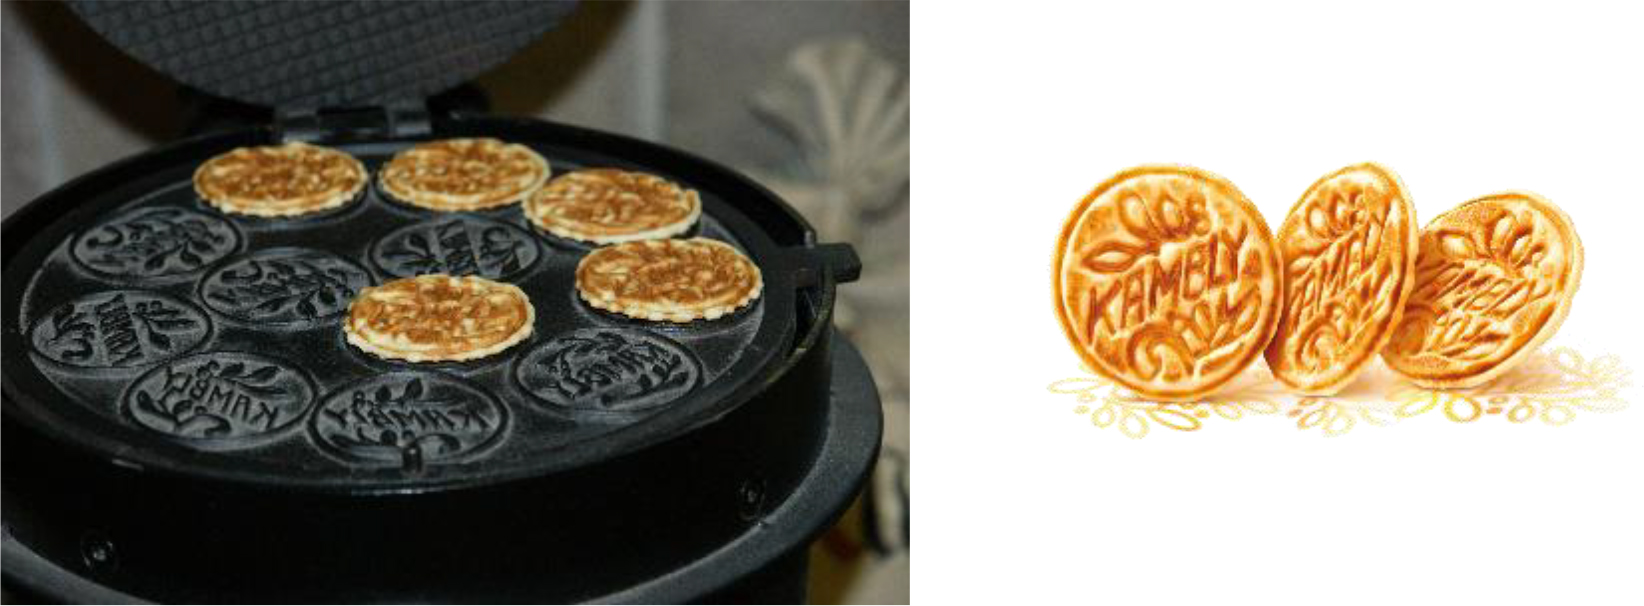 An image of a customized waffle maker-like machine with twelve circular molds. Four out of the twelve molds have small, pancakes that have the word Kambly with a leaf-like design on the pancake, above and below the word Kambly.